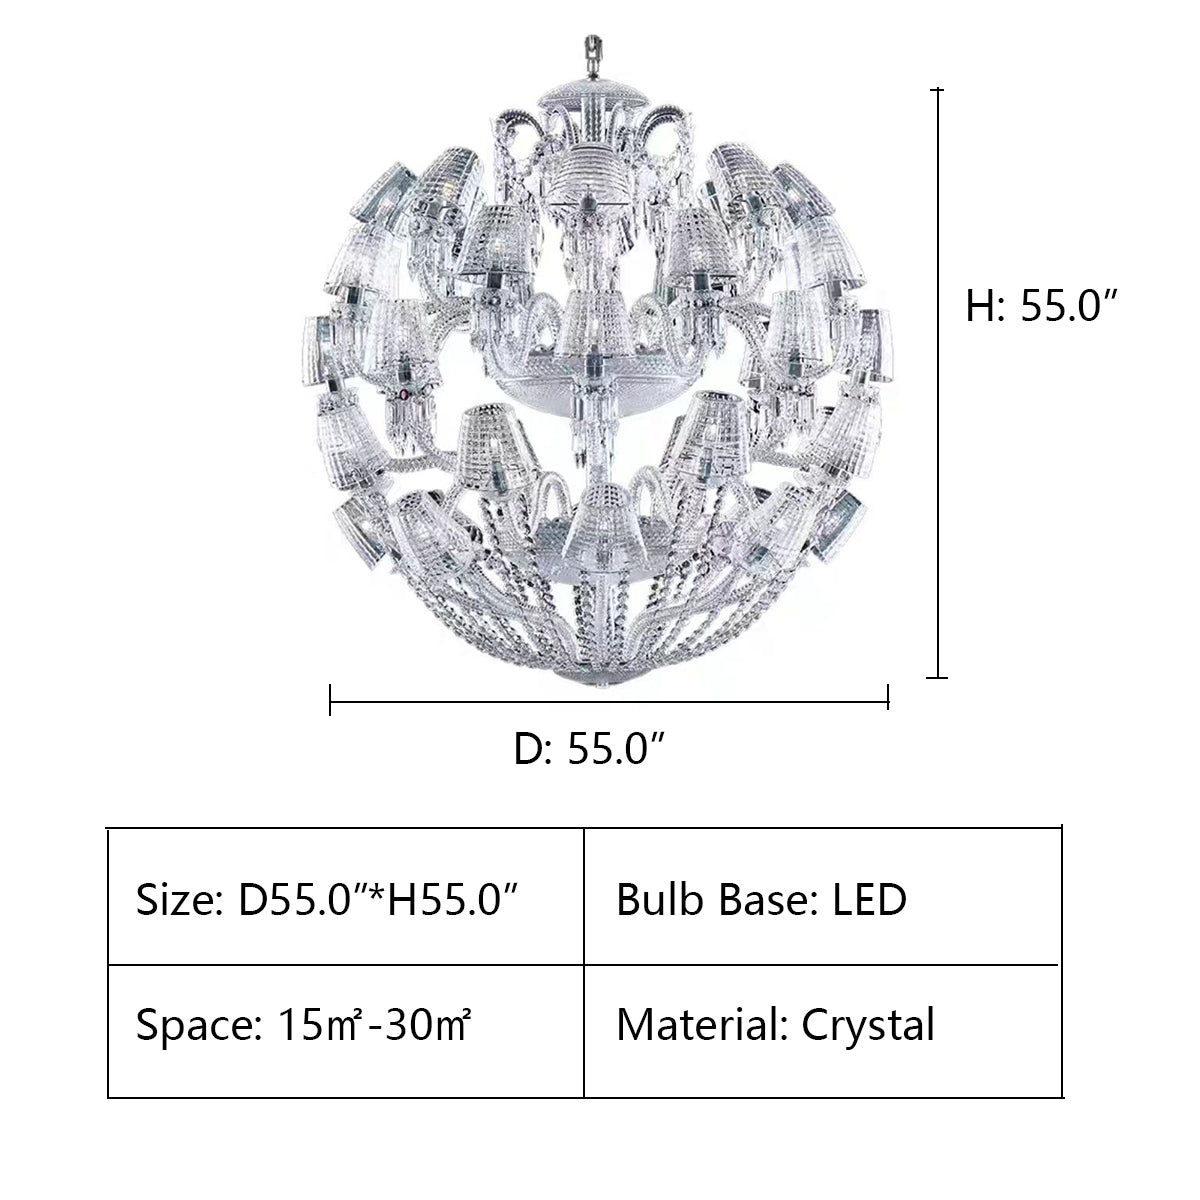 D55.0"*H55.0" ADELINE LEADED ROUND 50 LIGHT CRYSTAL CHANDELIER,Baccarat Design K9 Luxury Crystal Glass Chandelier Lighting,chandelier,chandeliers,crystal,round,sphere,candle,shade,glass shade,clear crystal,pendant,luxury,big,oversized,huge,large